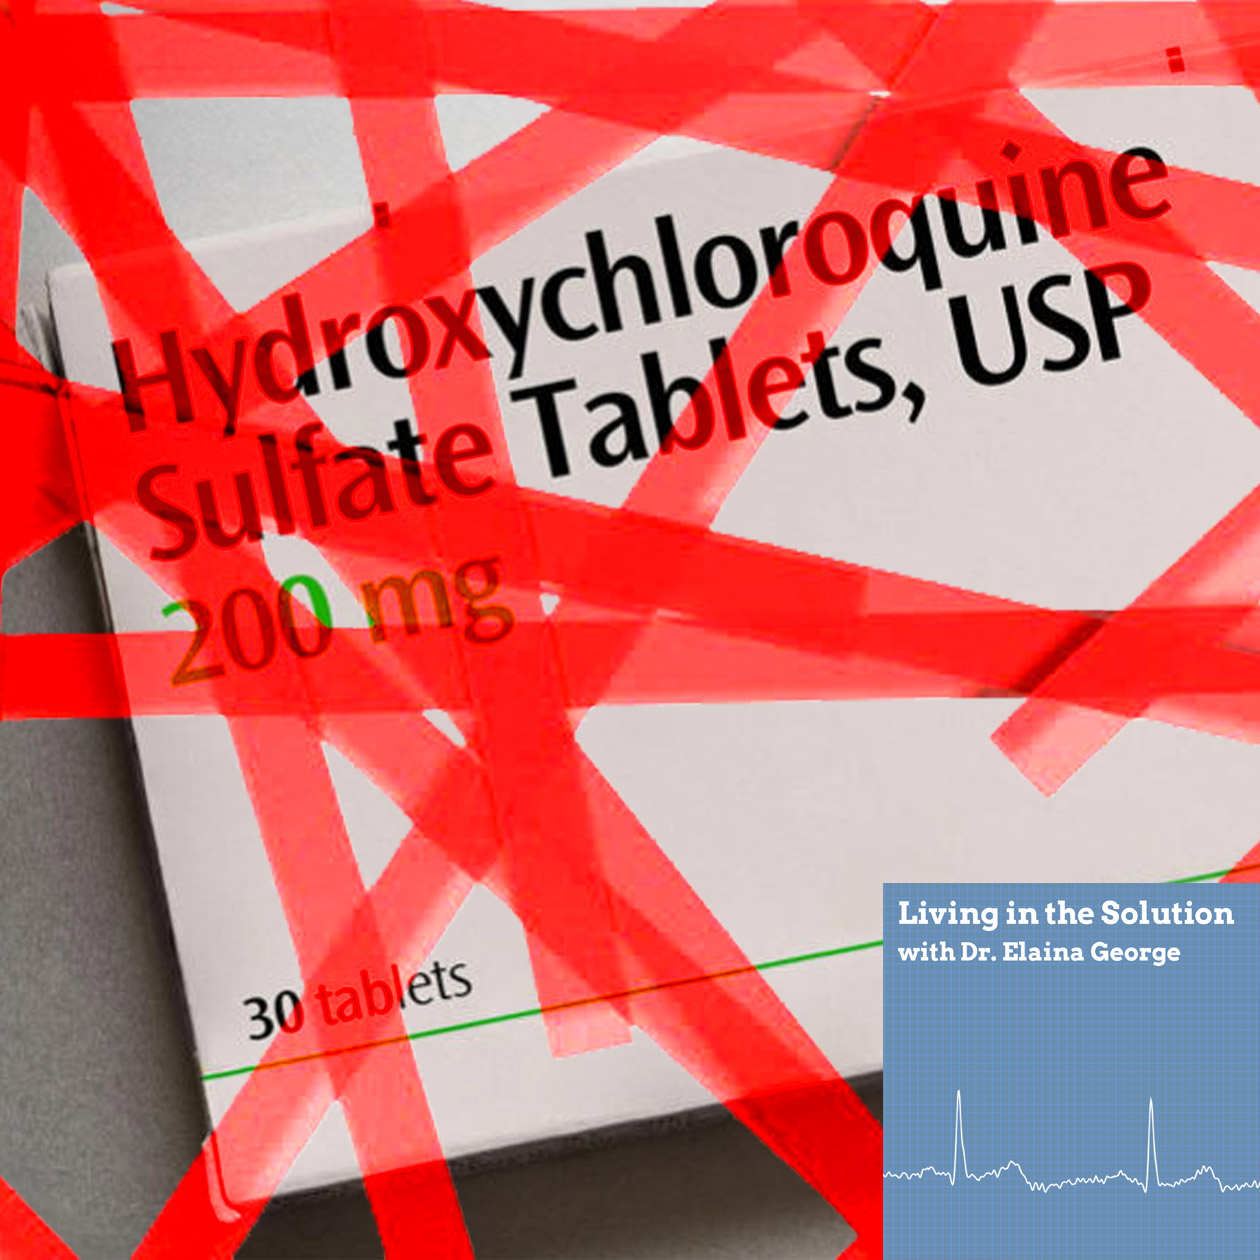 Hydroxychloroquine Red Tape FEATURED